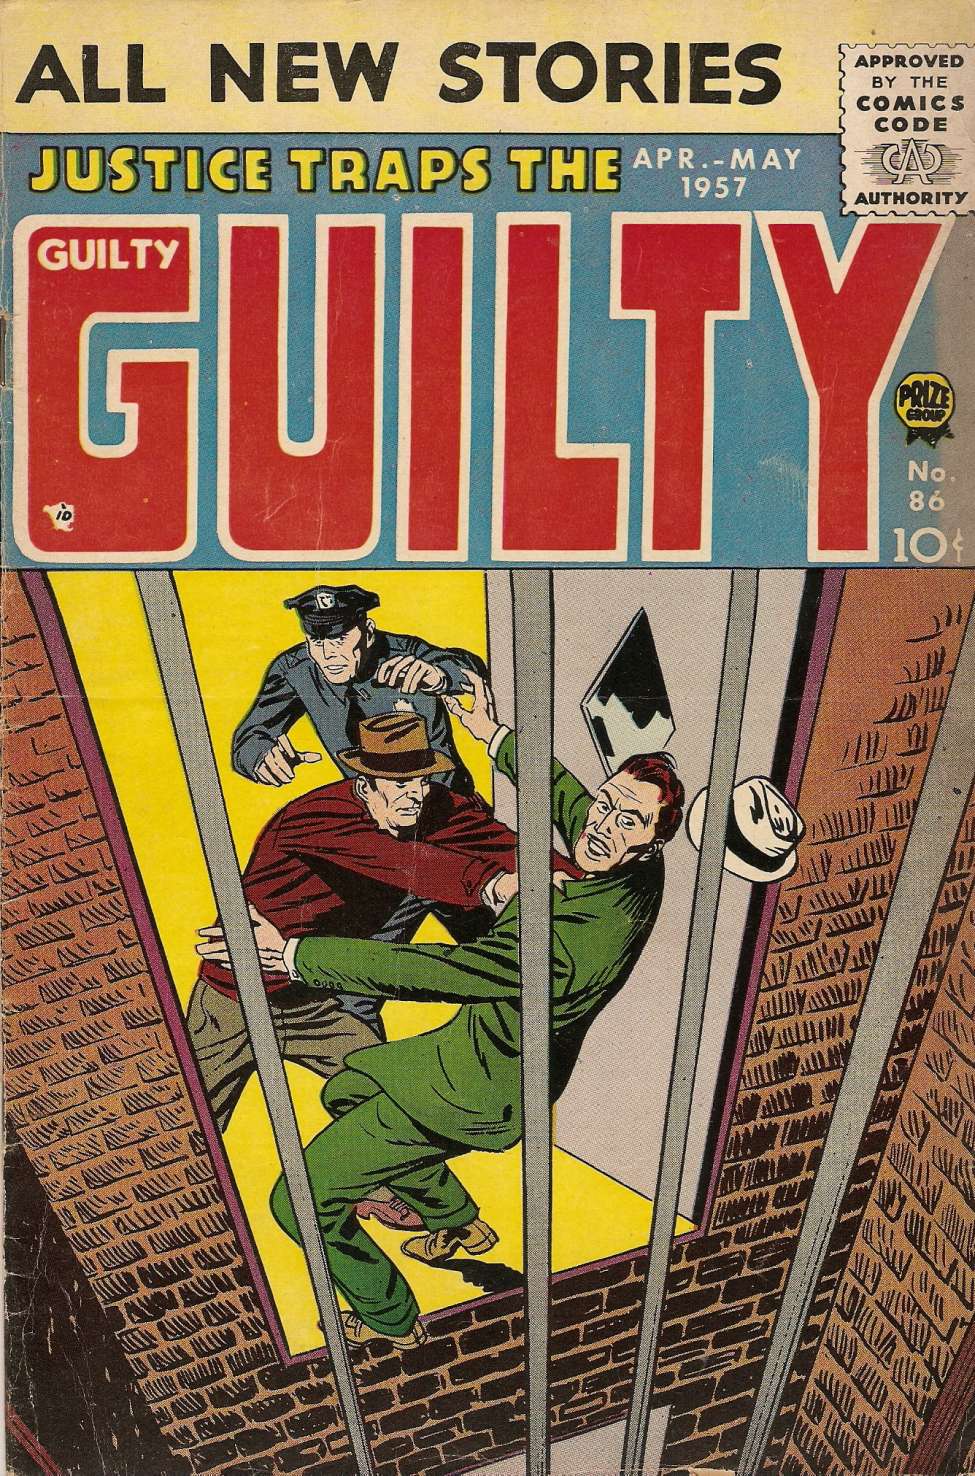 Book Cover For Justice Traps the Guilty 86